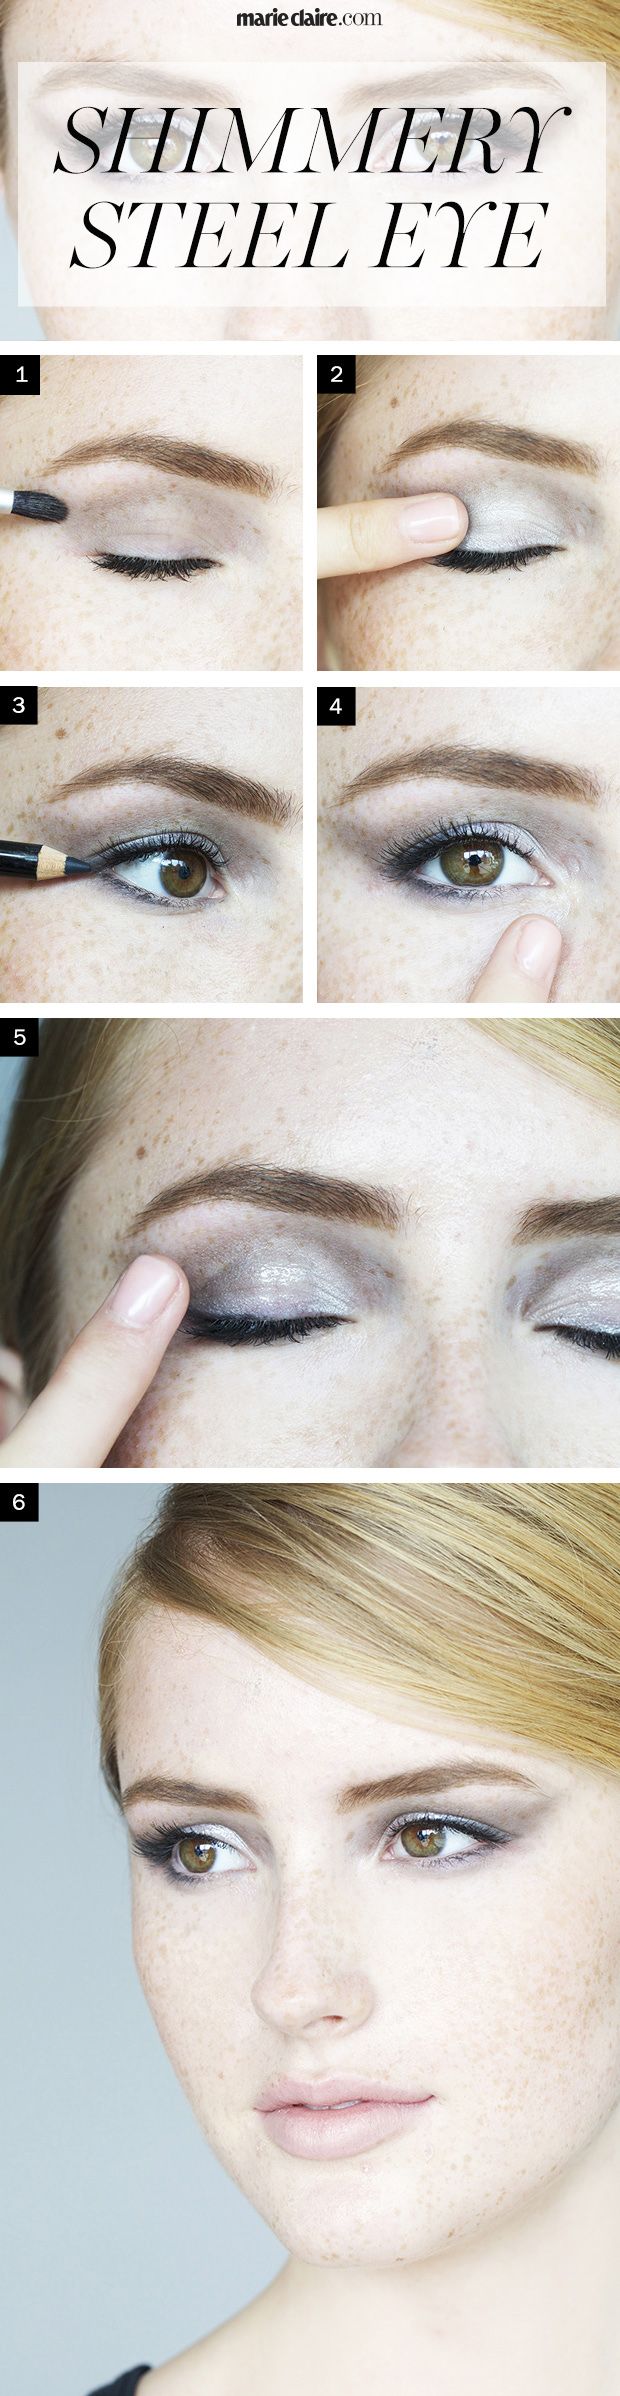 Makeup How To Shimmery Steel Eye